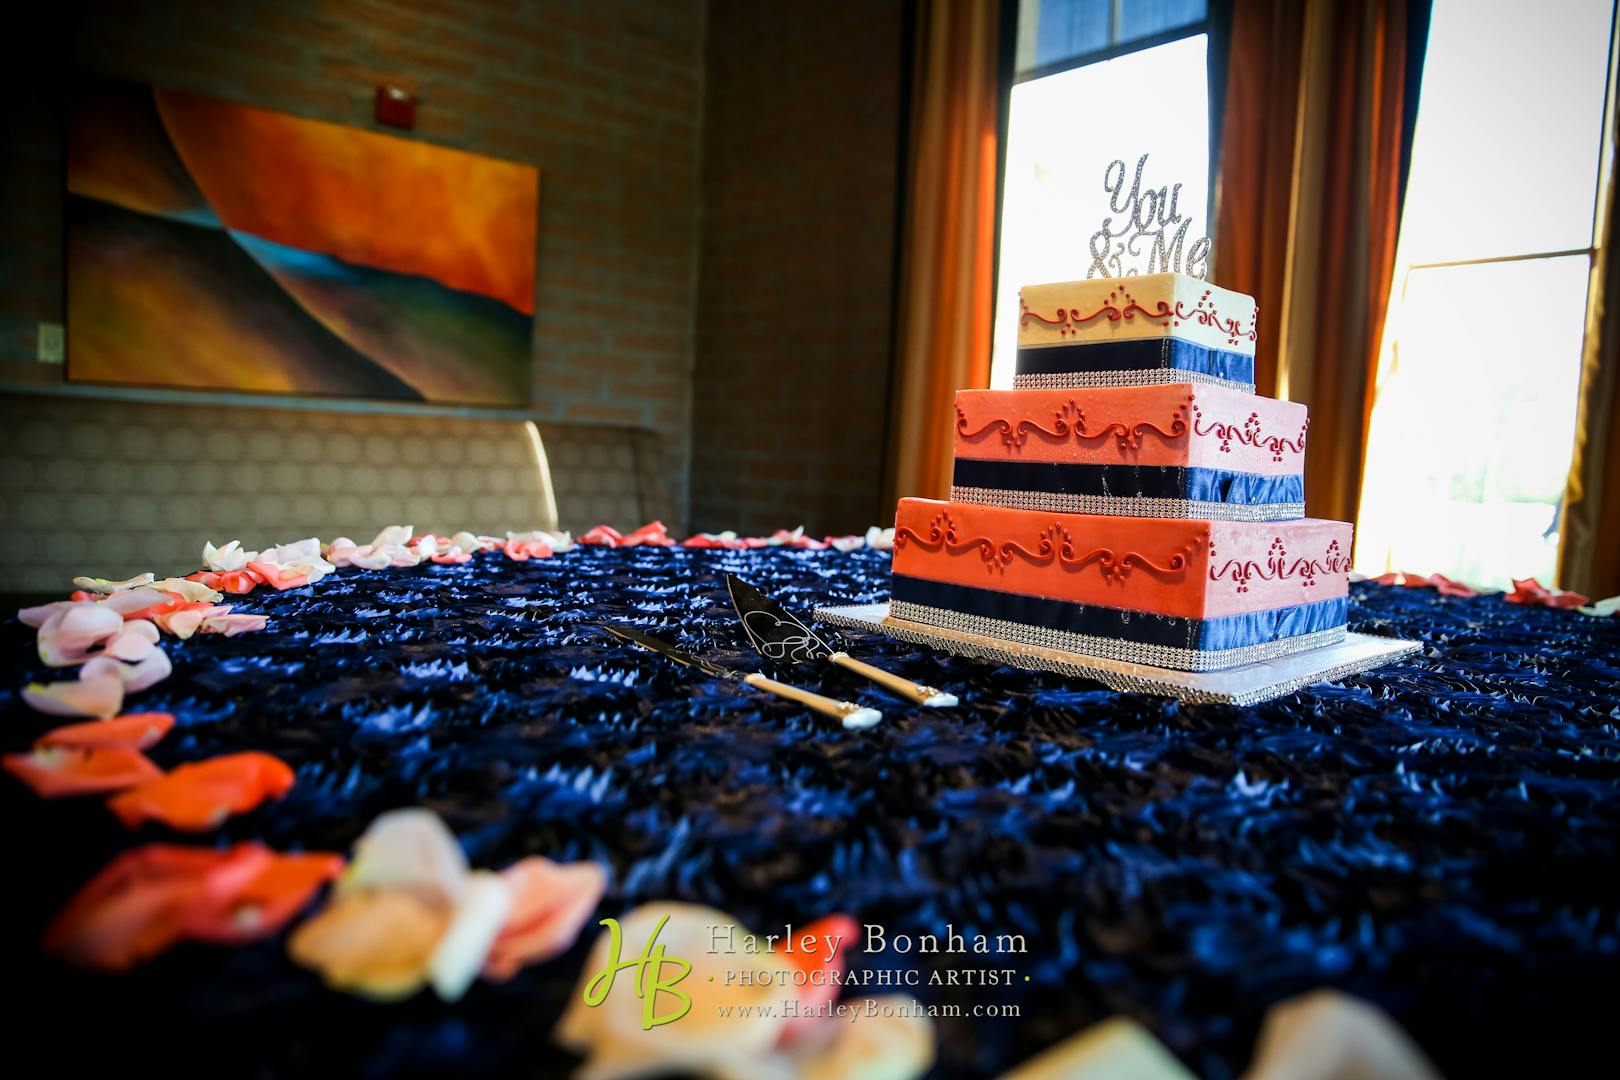 Rose and white wedding cake atop a table adorned with a deep blue cloth and lined with rose petals.